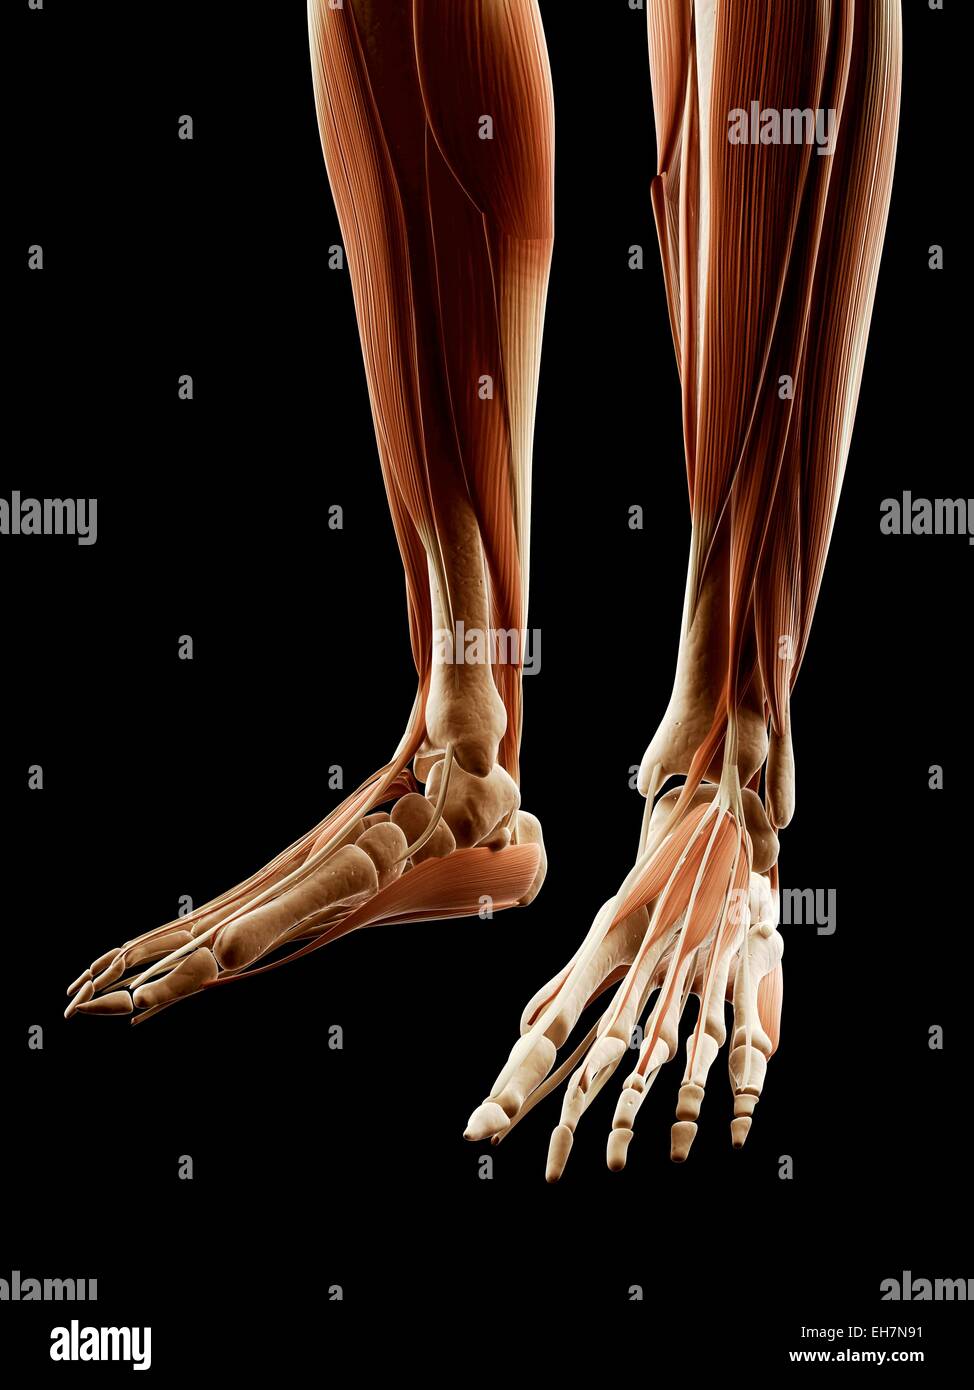 Human leg and foot muscles, illustration Stock Photo